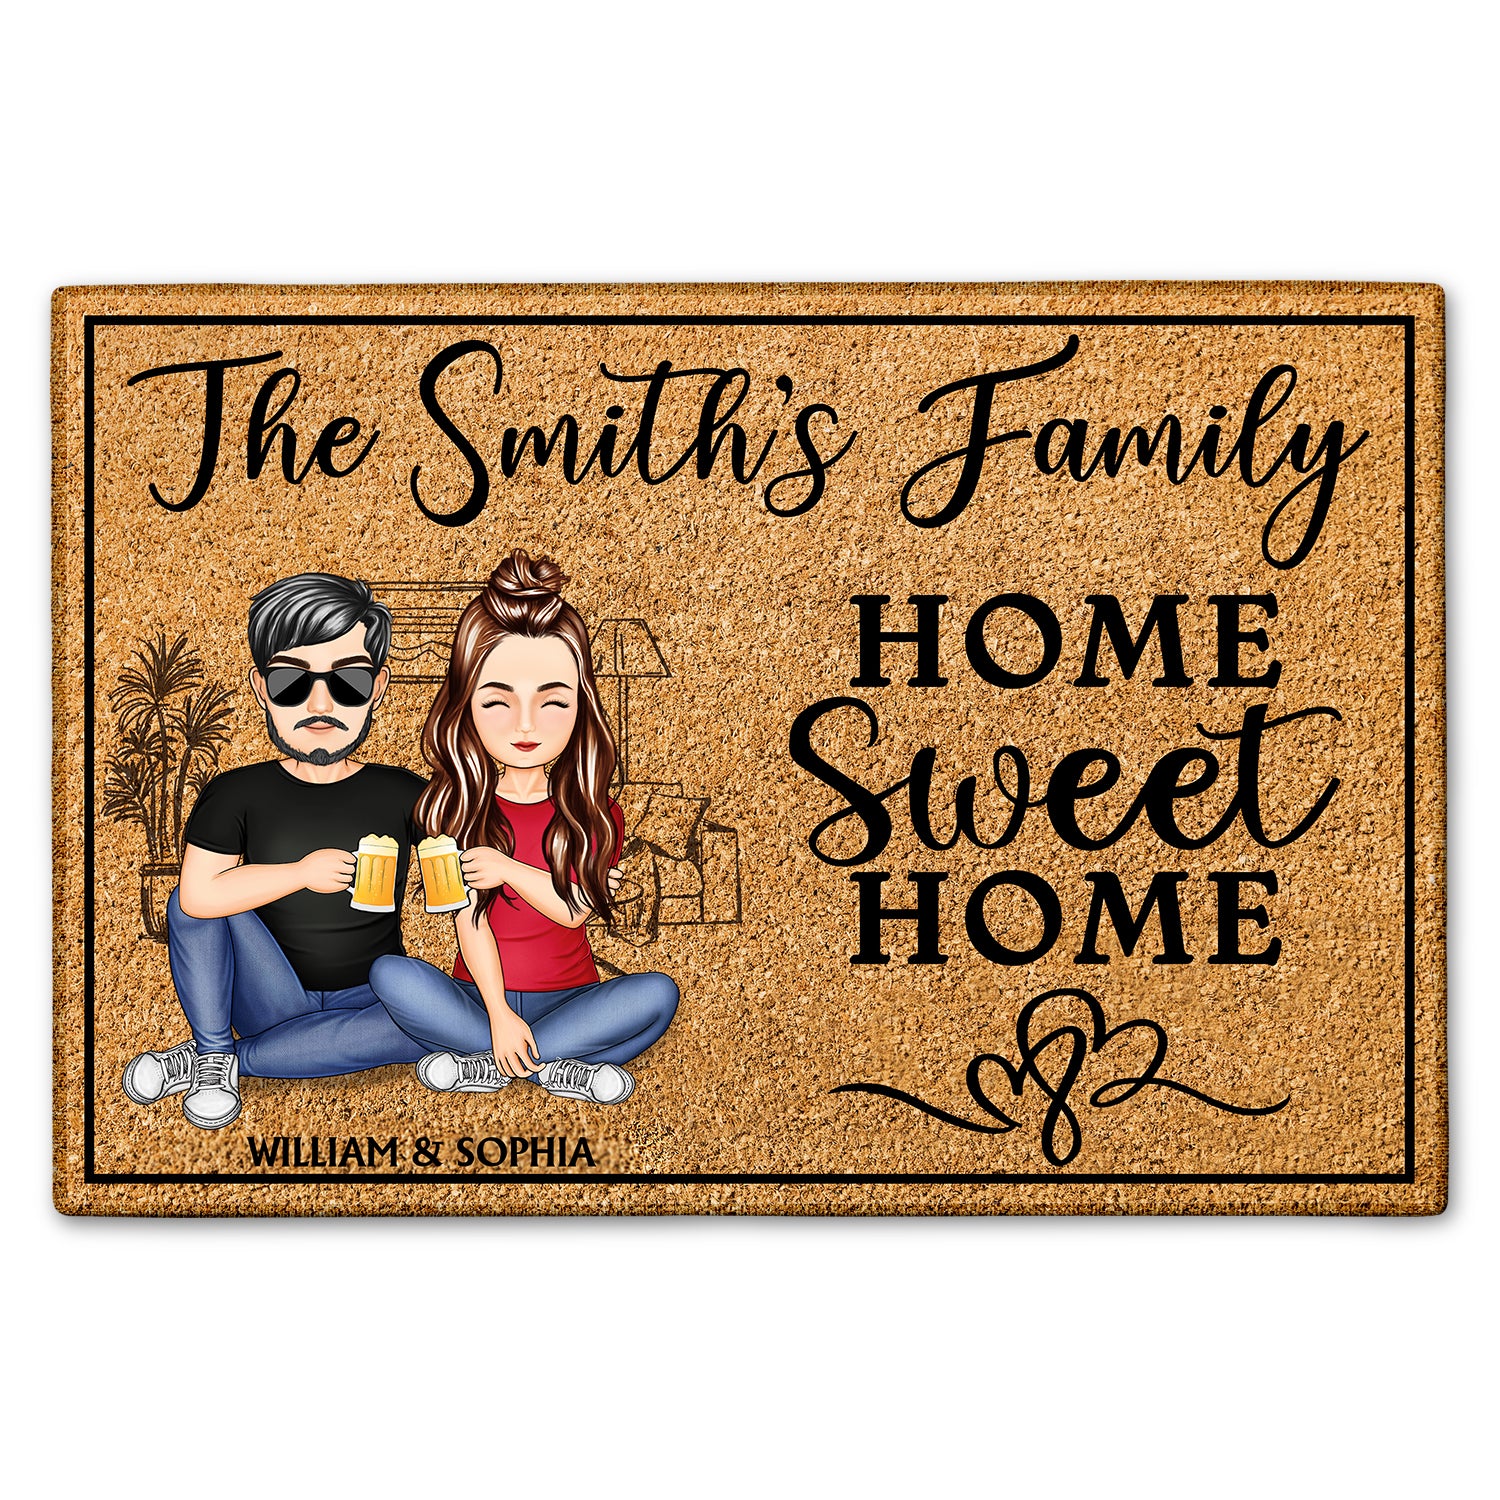 Home Sweet Home Family - Anniversary, Birthday, Home Decor Gift For Spouse, Lover, Husband, Wife, Boyfriend, Girlfriend, Couple - Personalized Custom Doormat